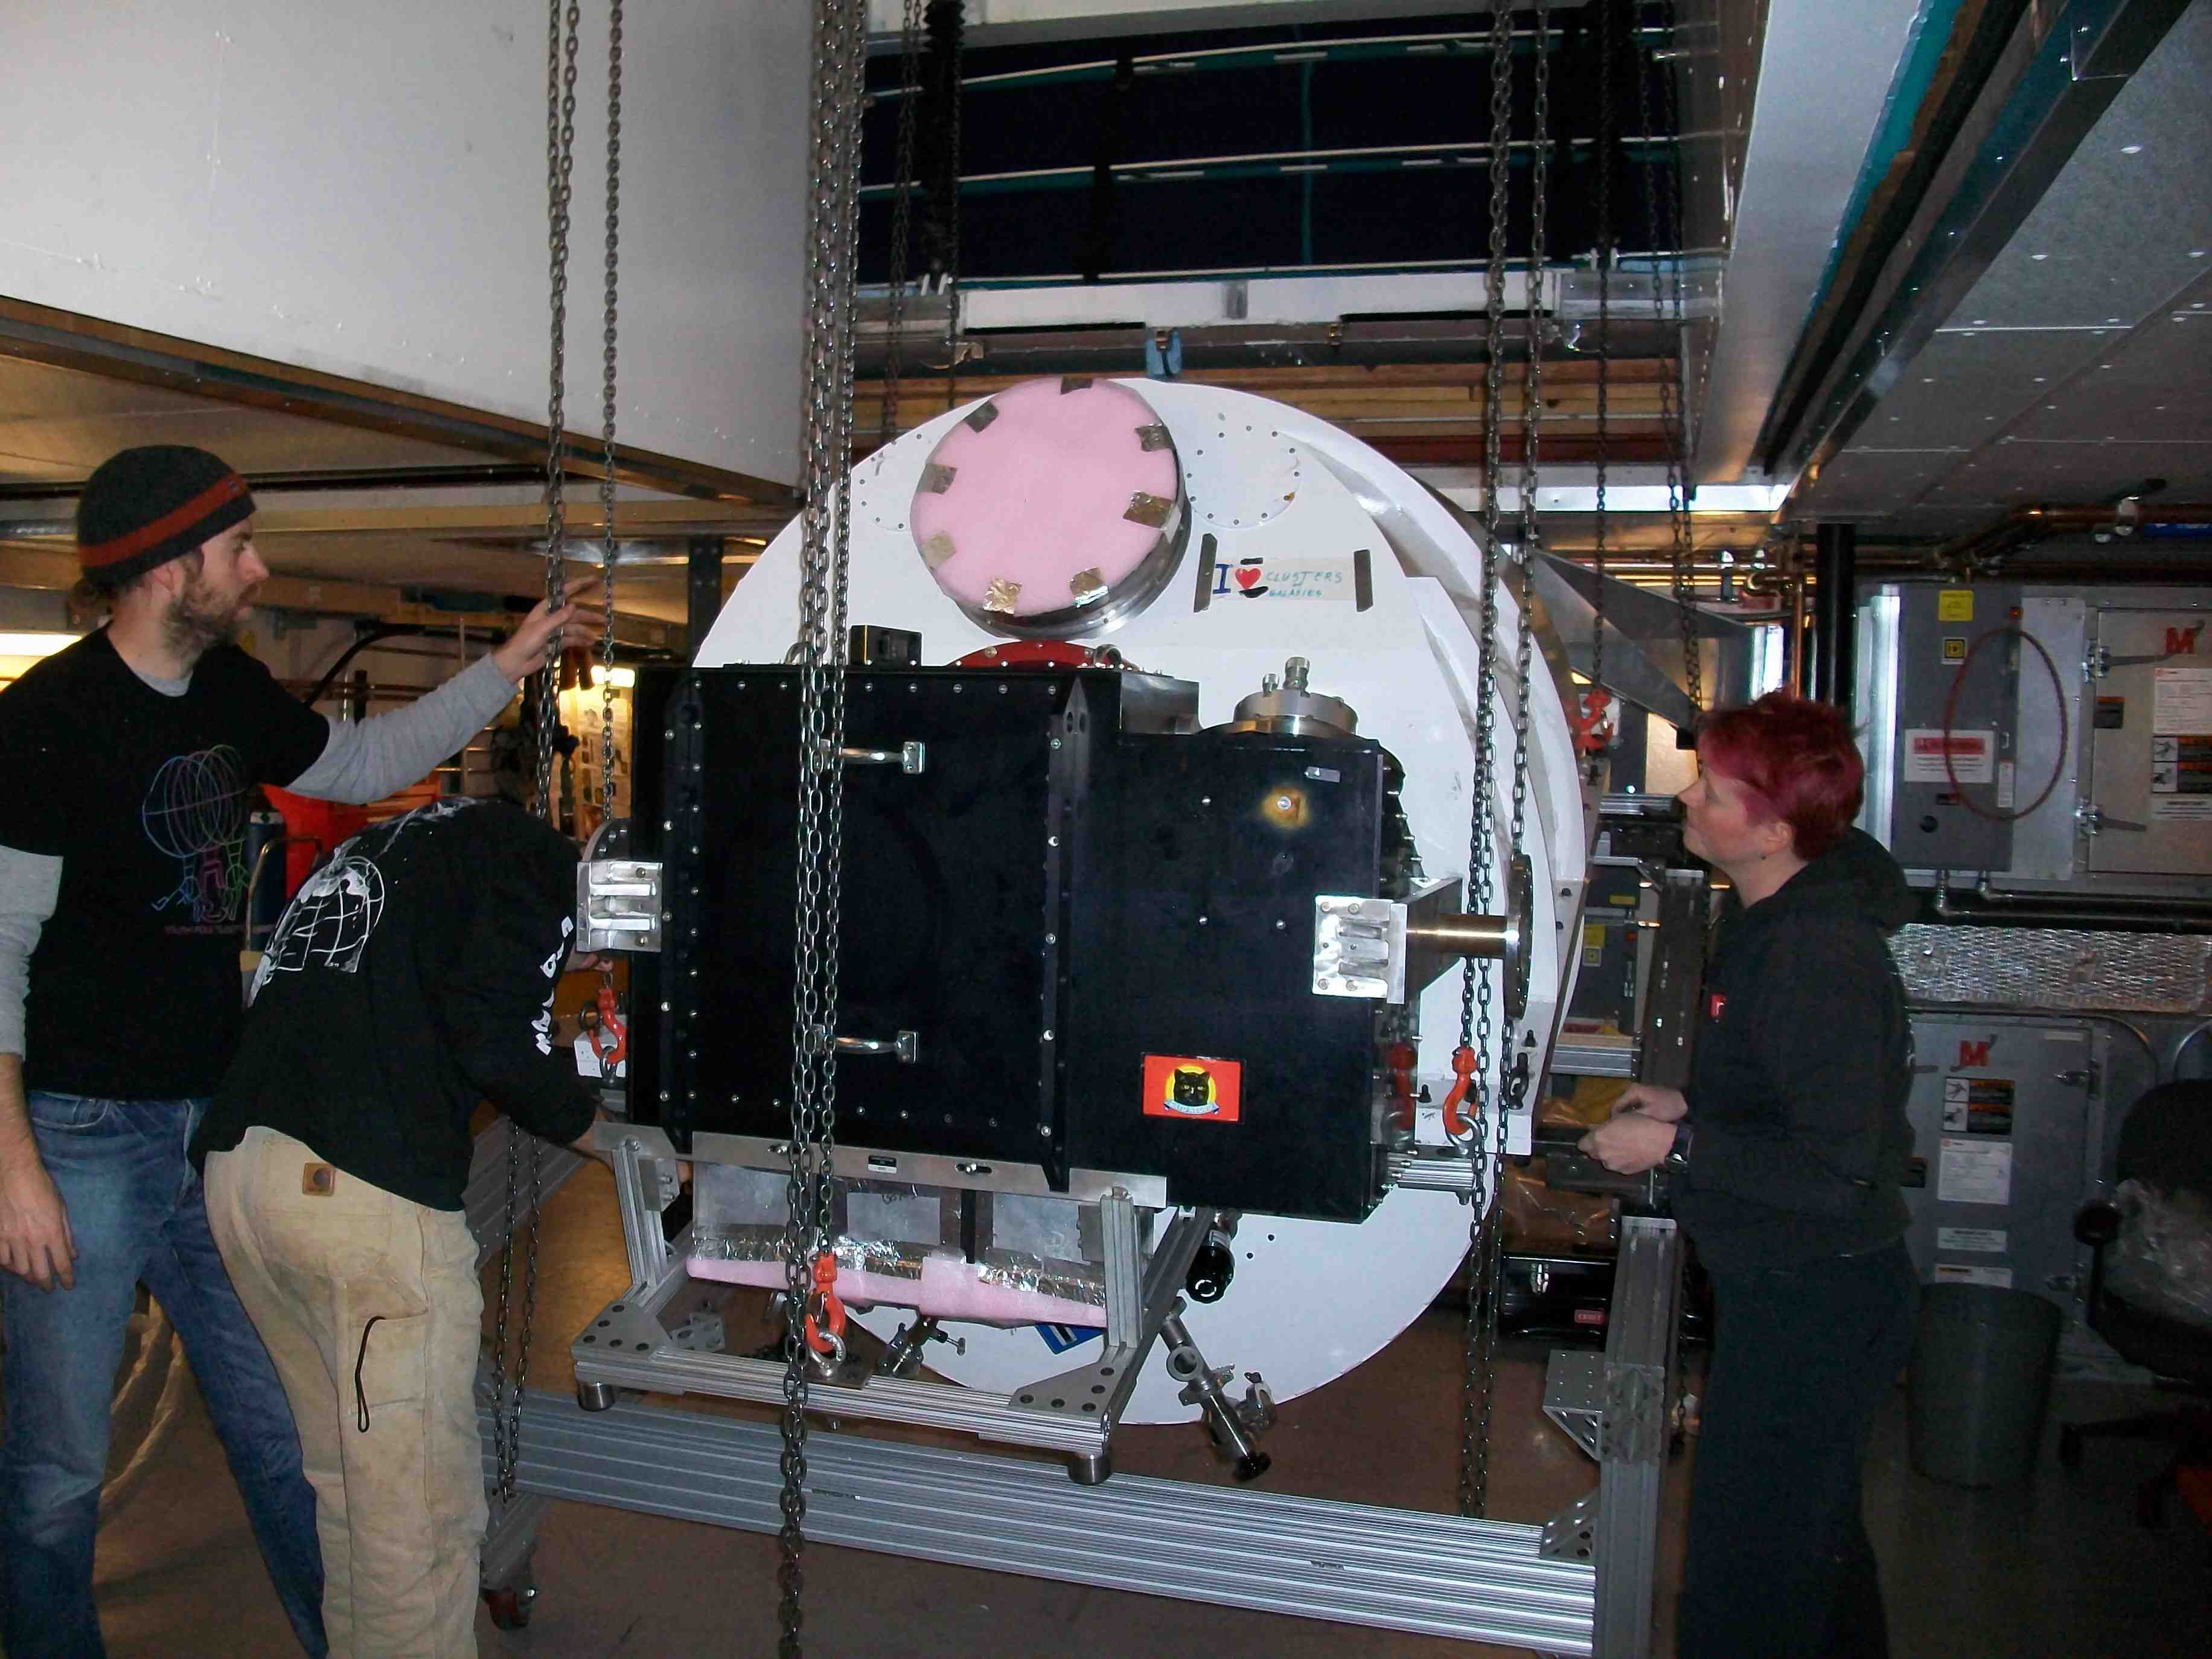 The receiver cryostat being mated to the enormous white Optics cryostat.